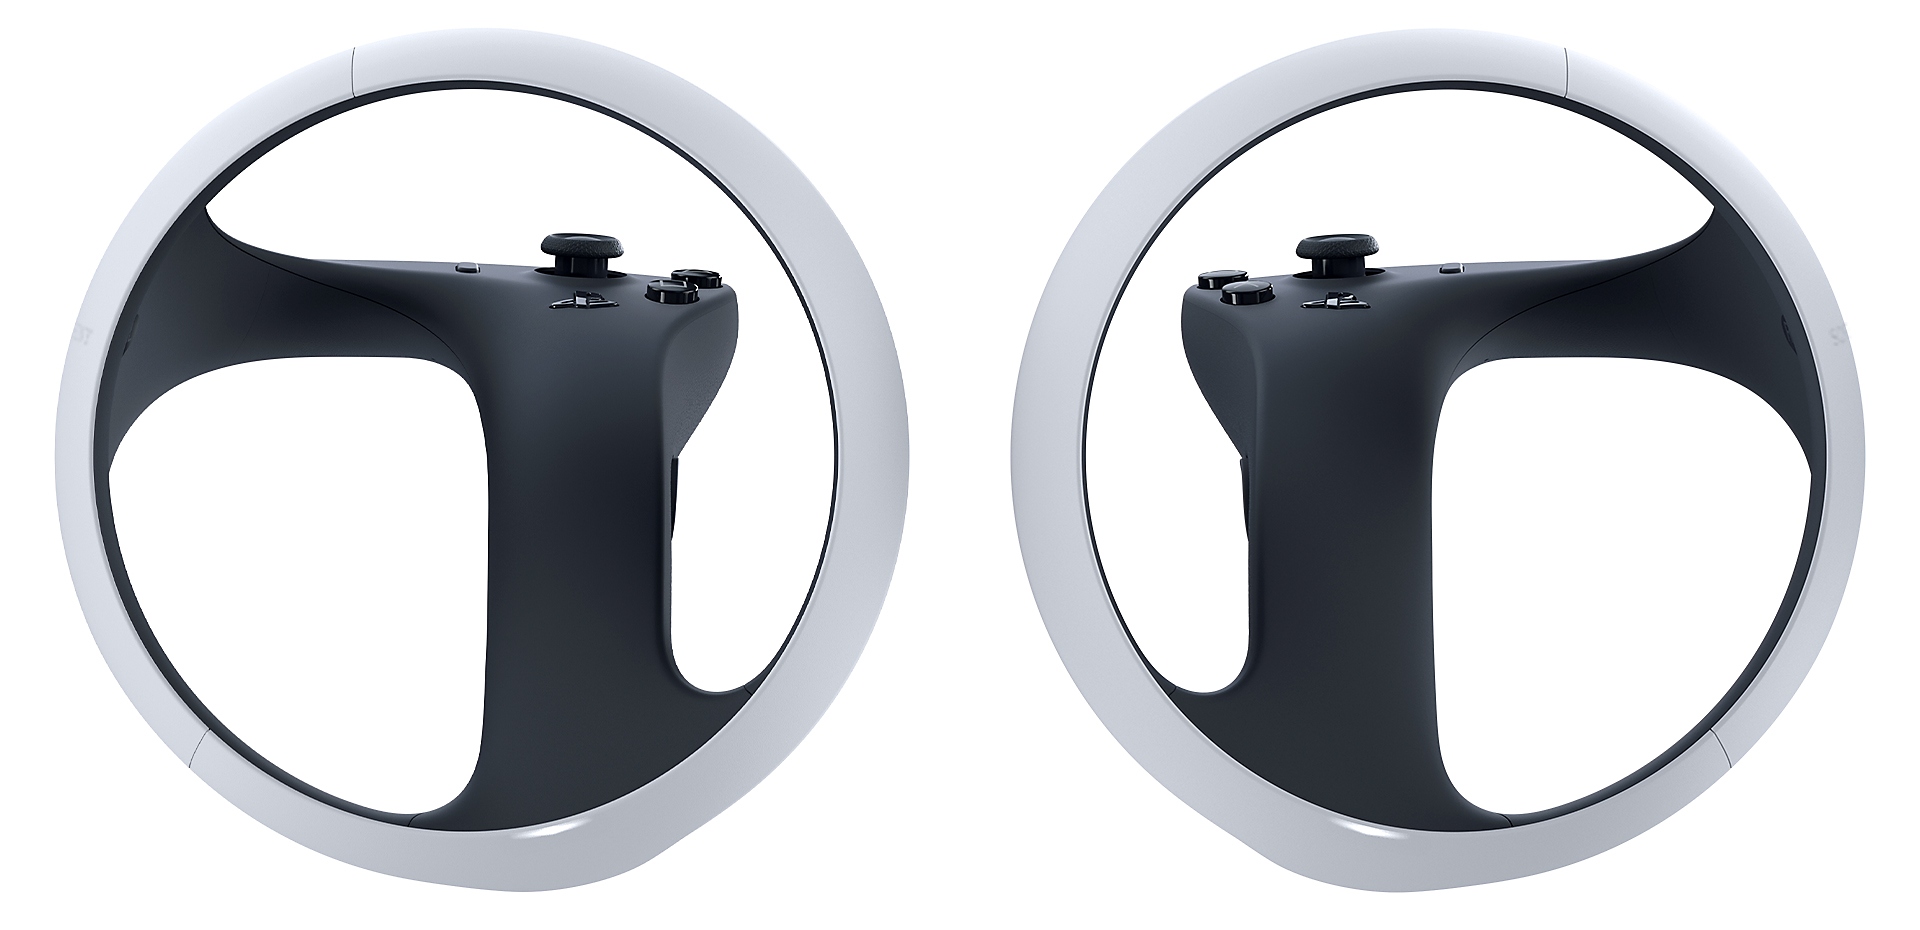 PS VR2 controllers